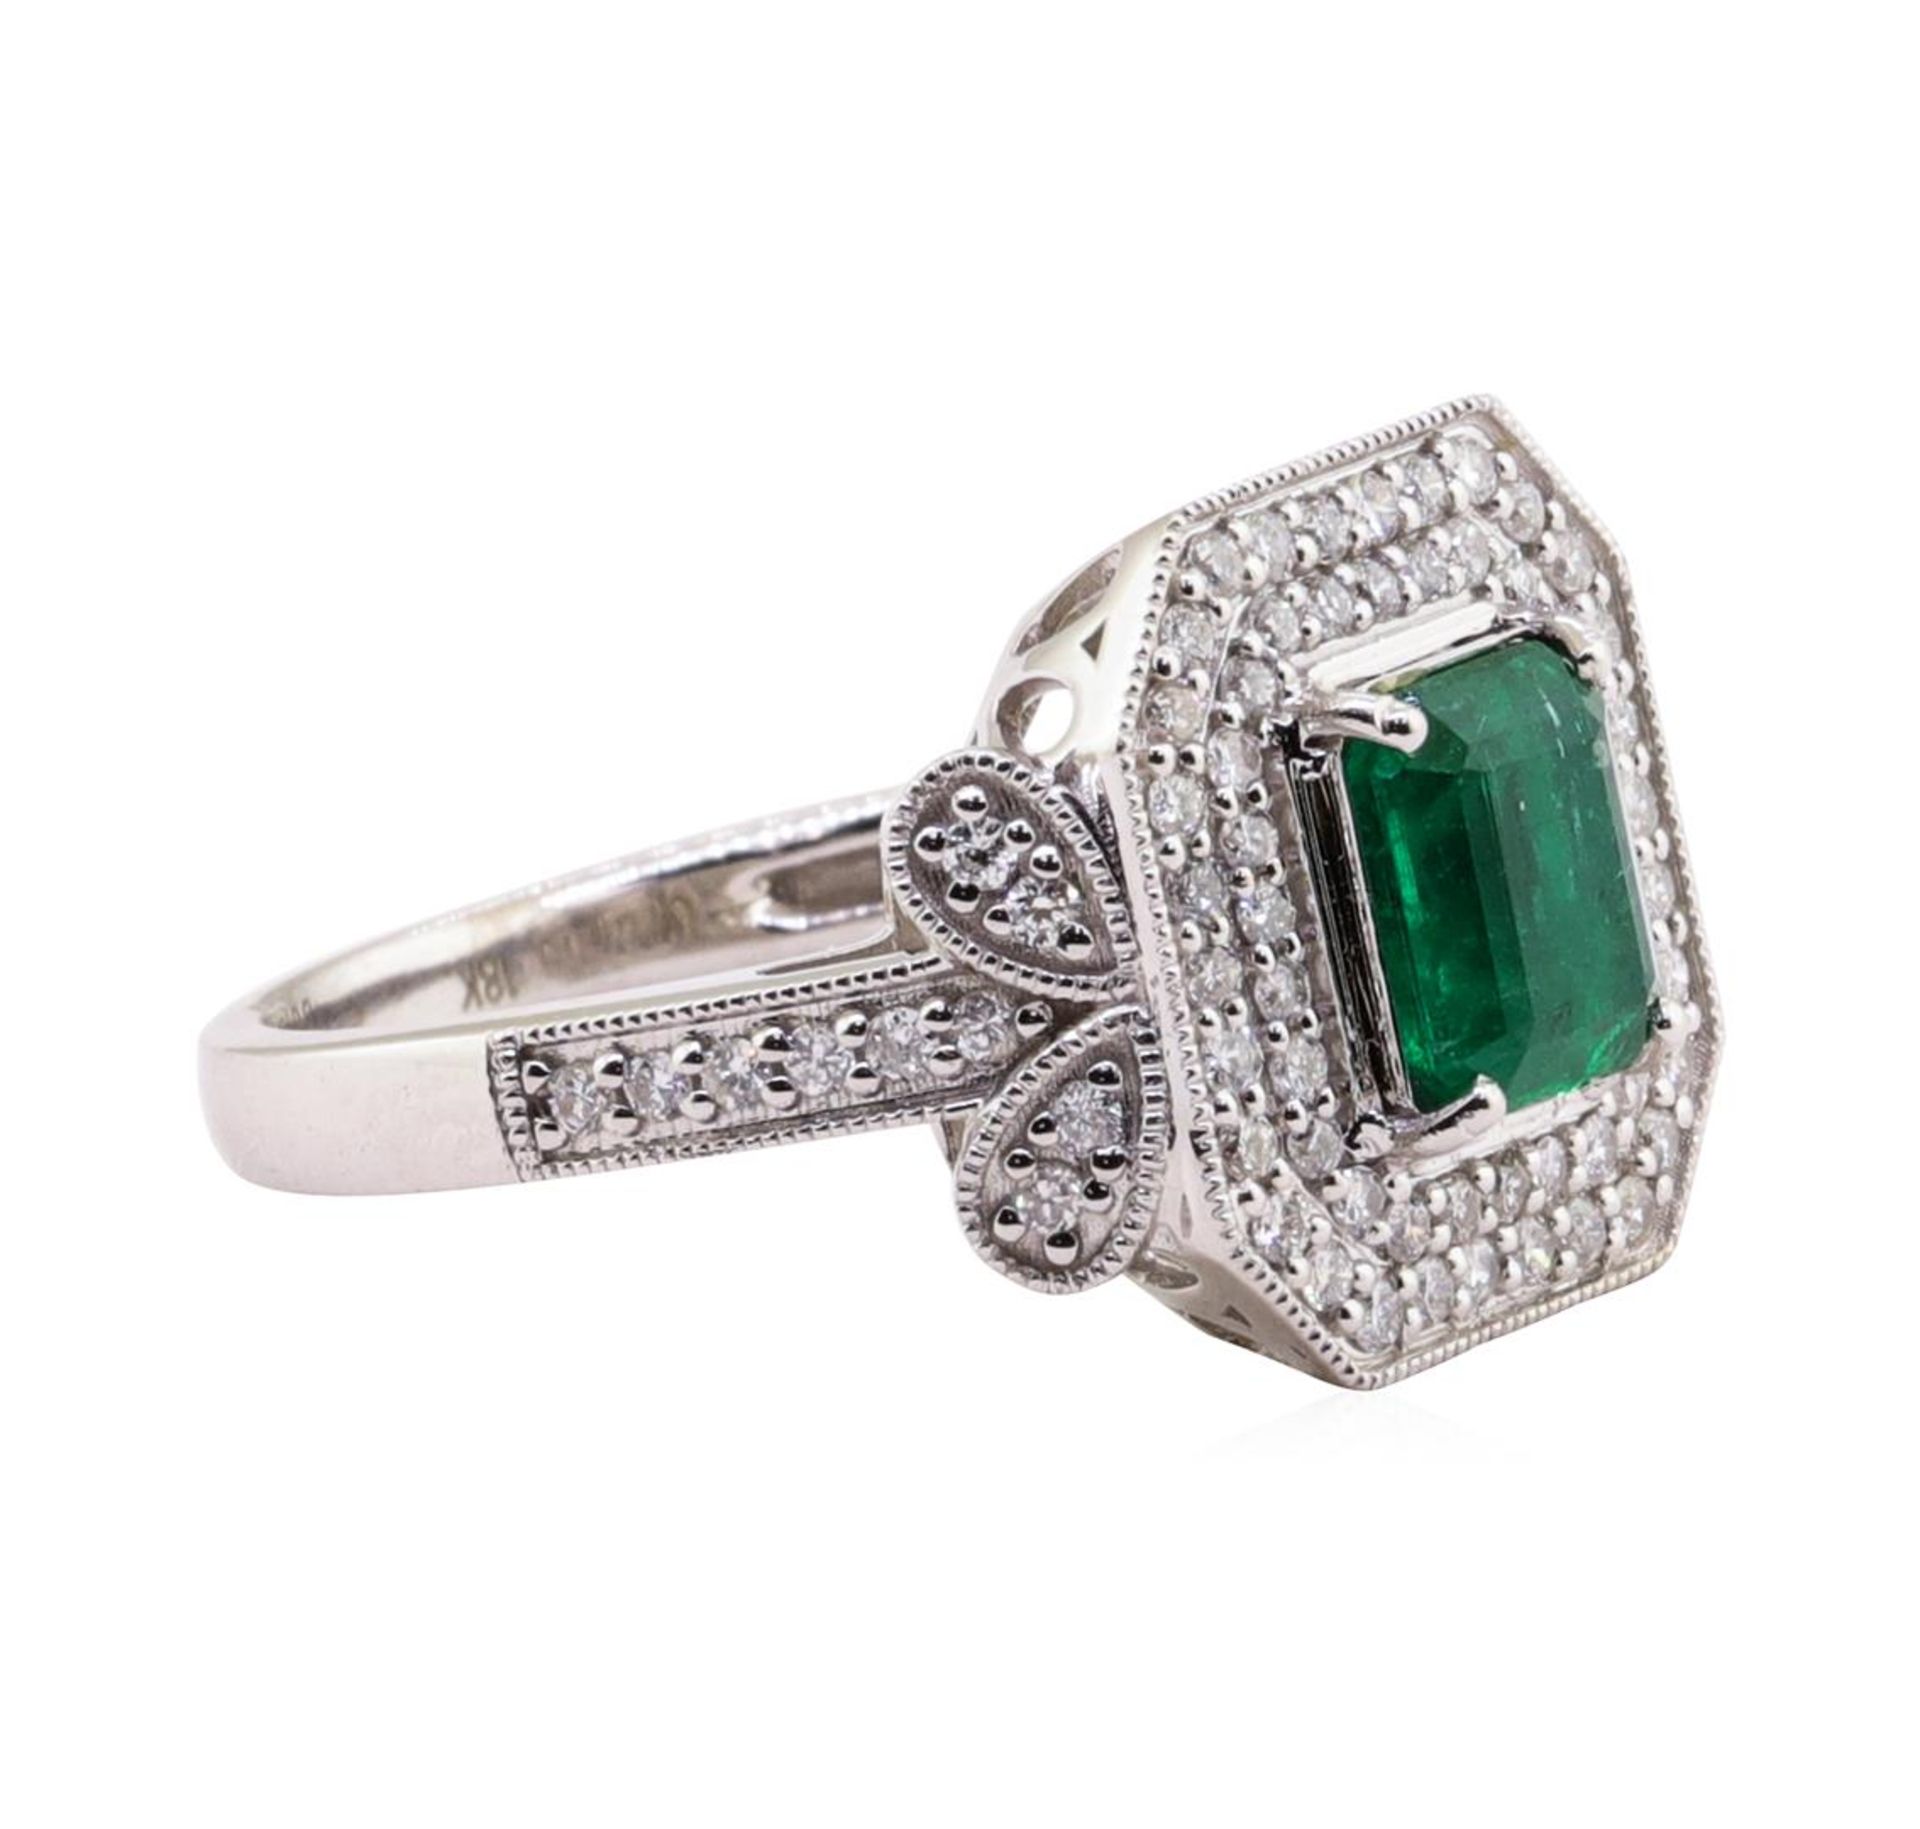 1.15 ctw Emerald and Diamond Ring - 18KT White Gold - Image 2 of 5